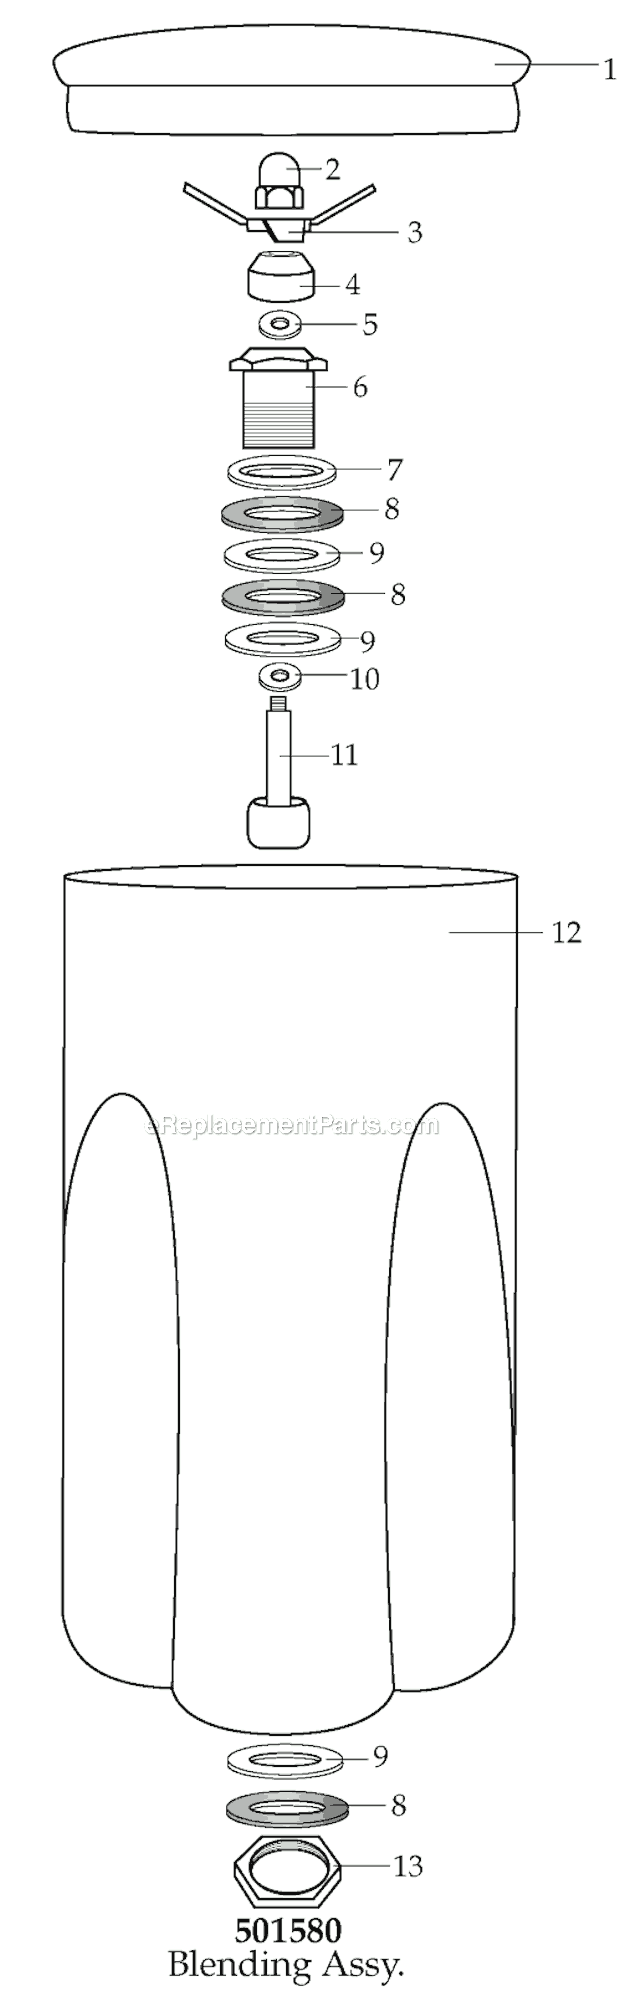 Waring SS515 Blender Page A Diagram